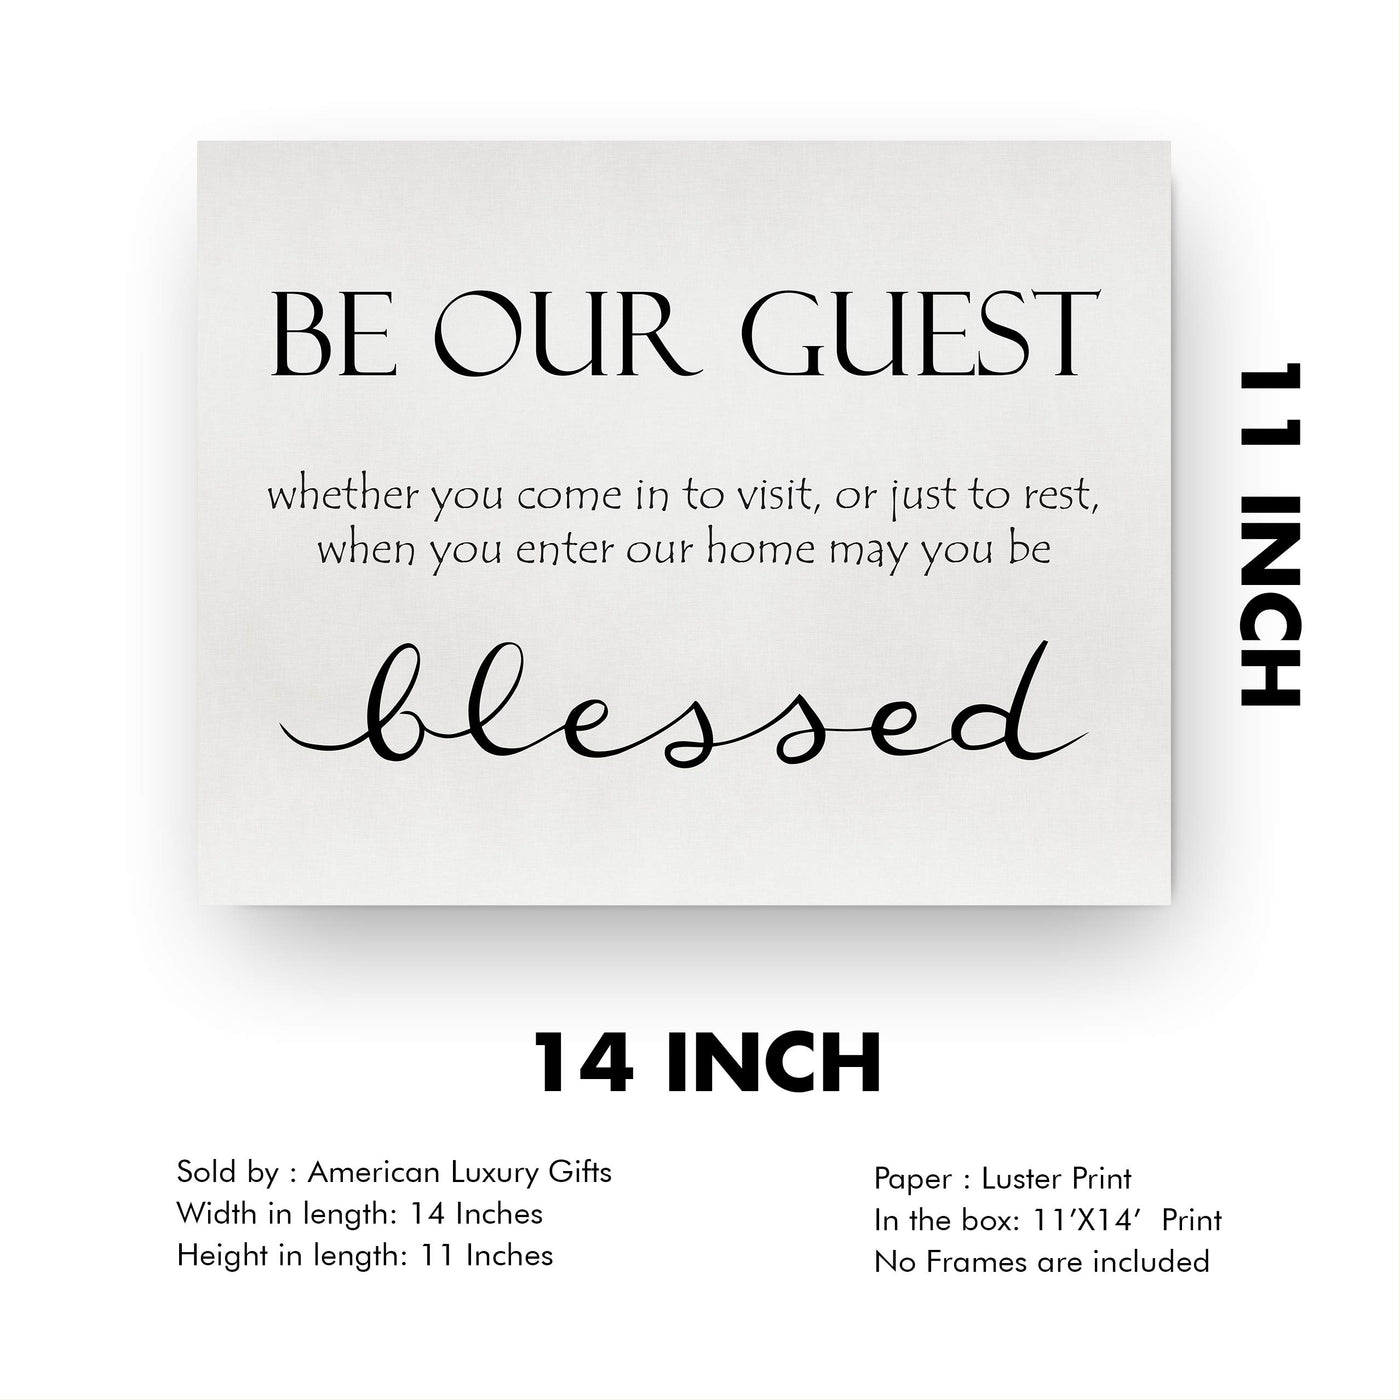 Be Our Guest-Inspirational Welcome Sign Wall Art -14 x 11" Rustic Farmhouse Print-Ready to Frame. Modern Typographic Design. Home-Guest Room-Patio-Lake-Beach House Decor. Great Housewarming Gift!